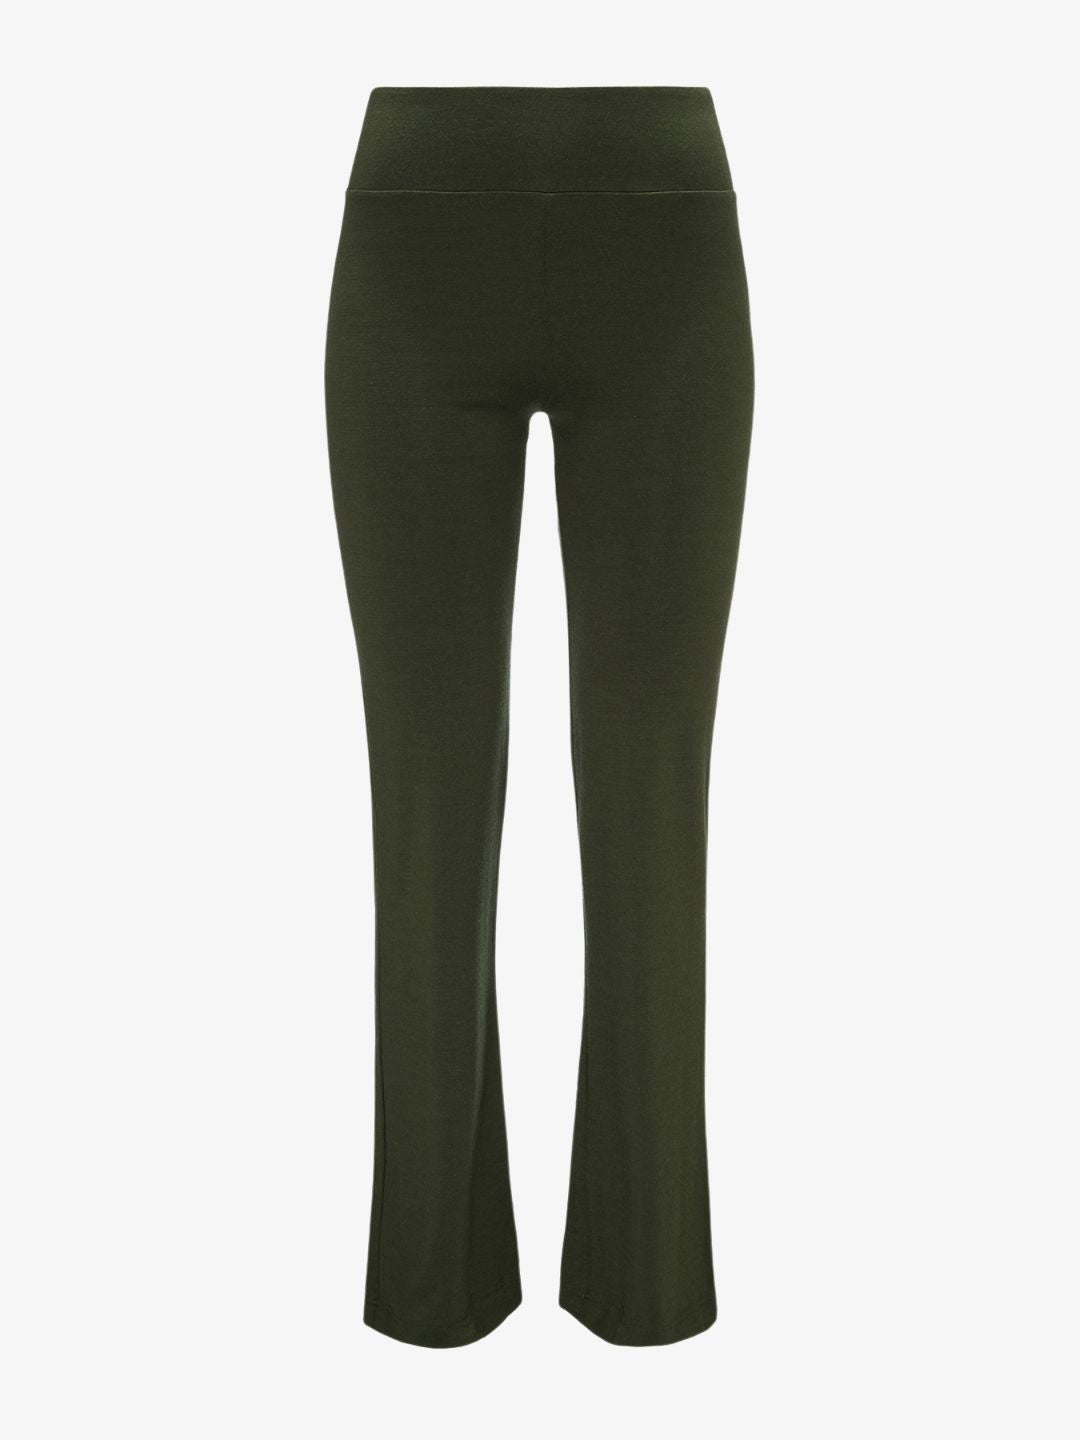 Hygge Flared Pant Women Olive Green